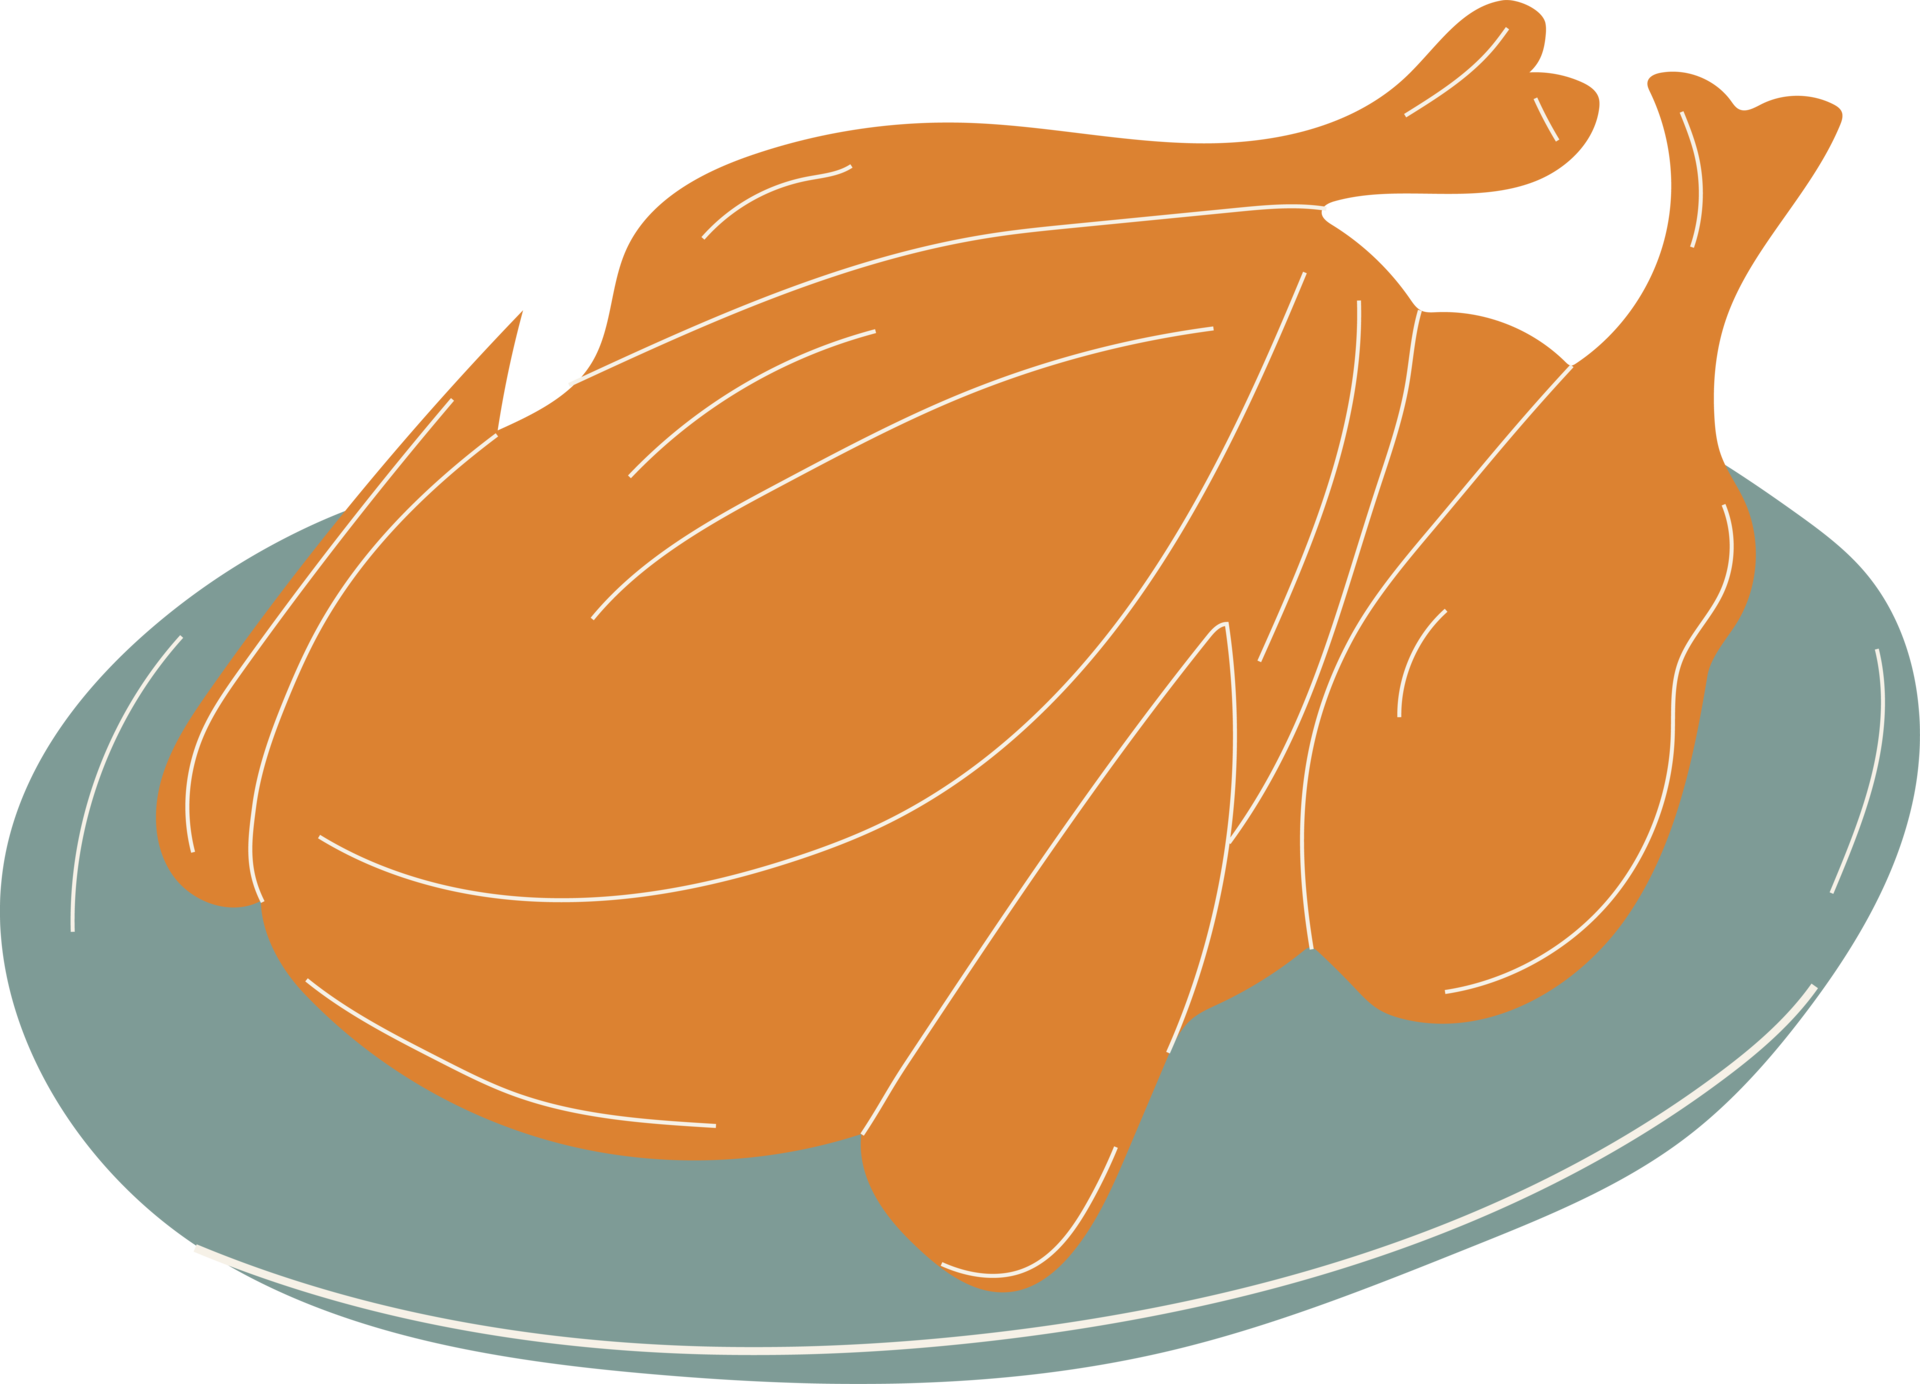 Free Illustration of baked turkey for thanksgiving day. in PNG cartoon  style. All elements are isolated 15098765 PNG with Transparent Background